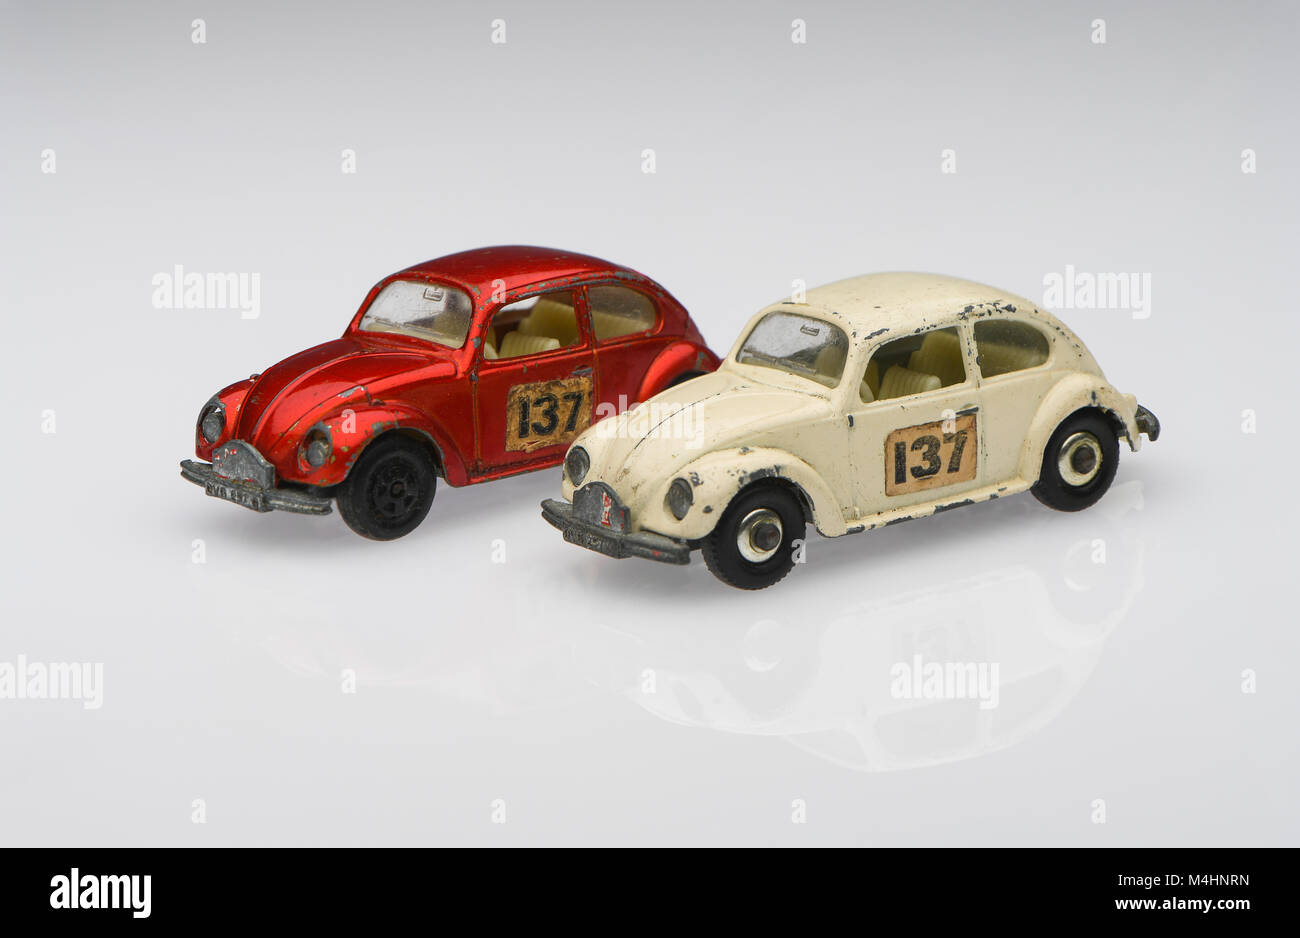 A pair of white and red vintage 1500 saloon Volkswagen beetle toy